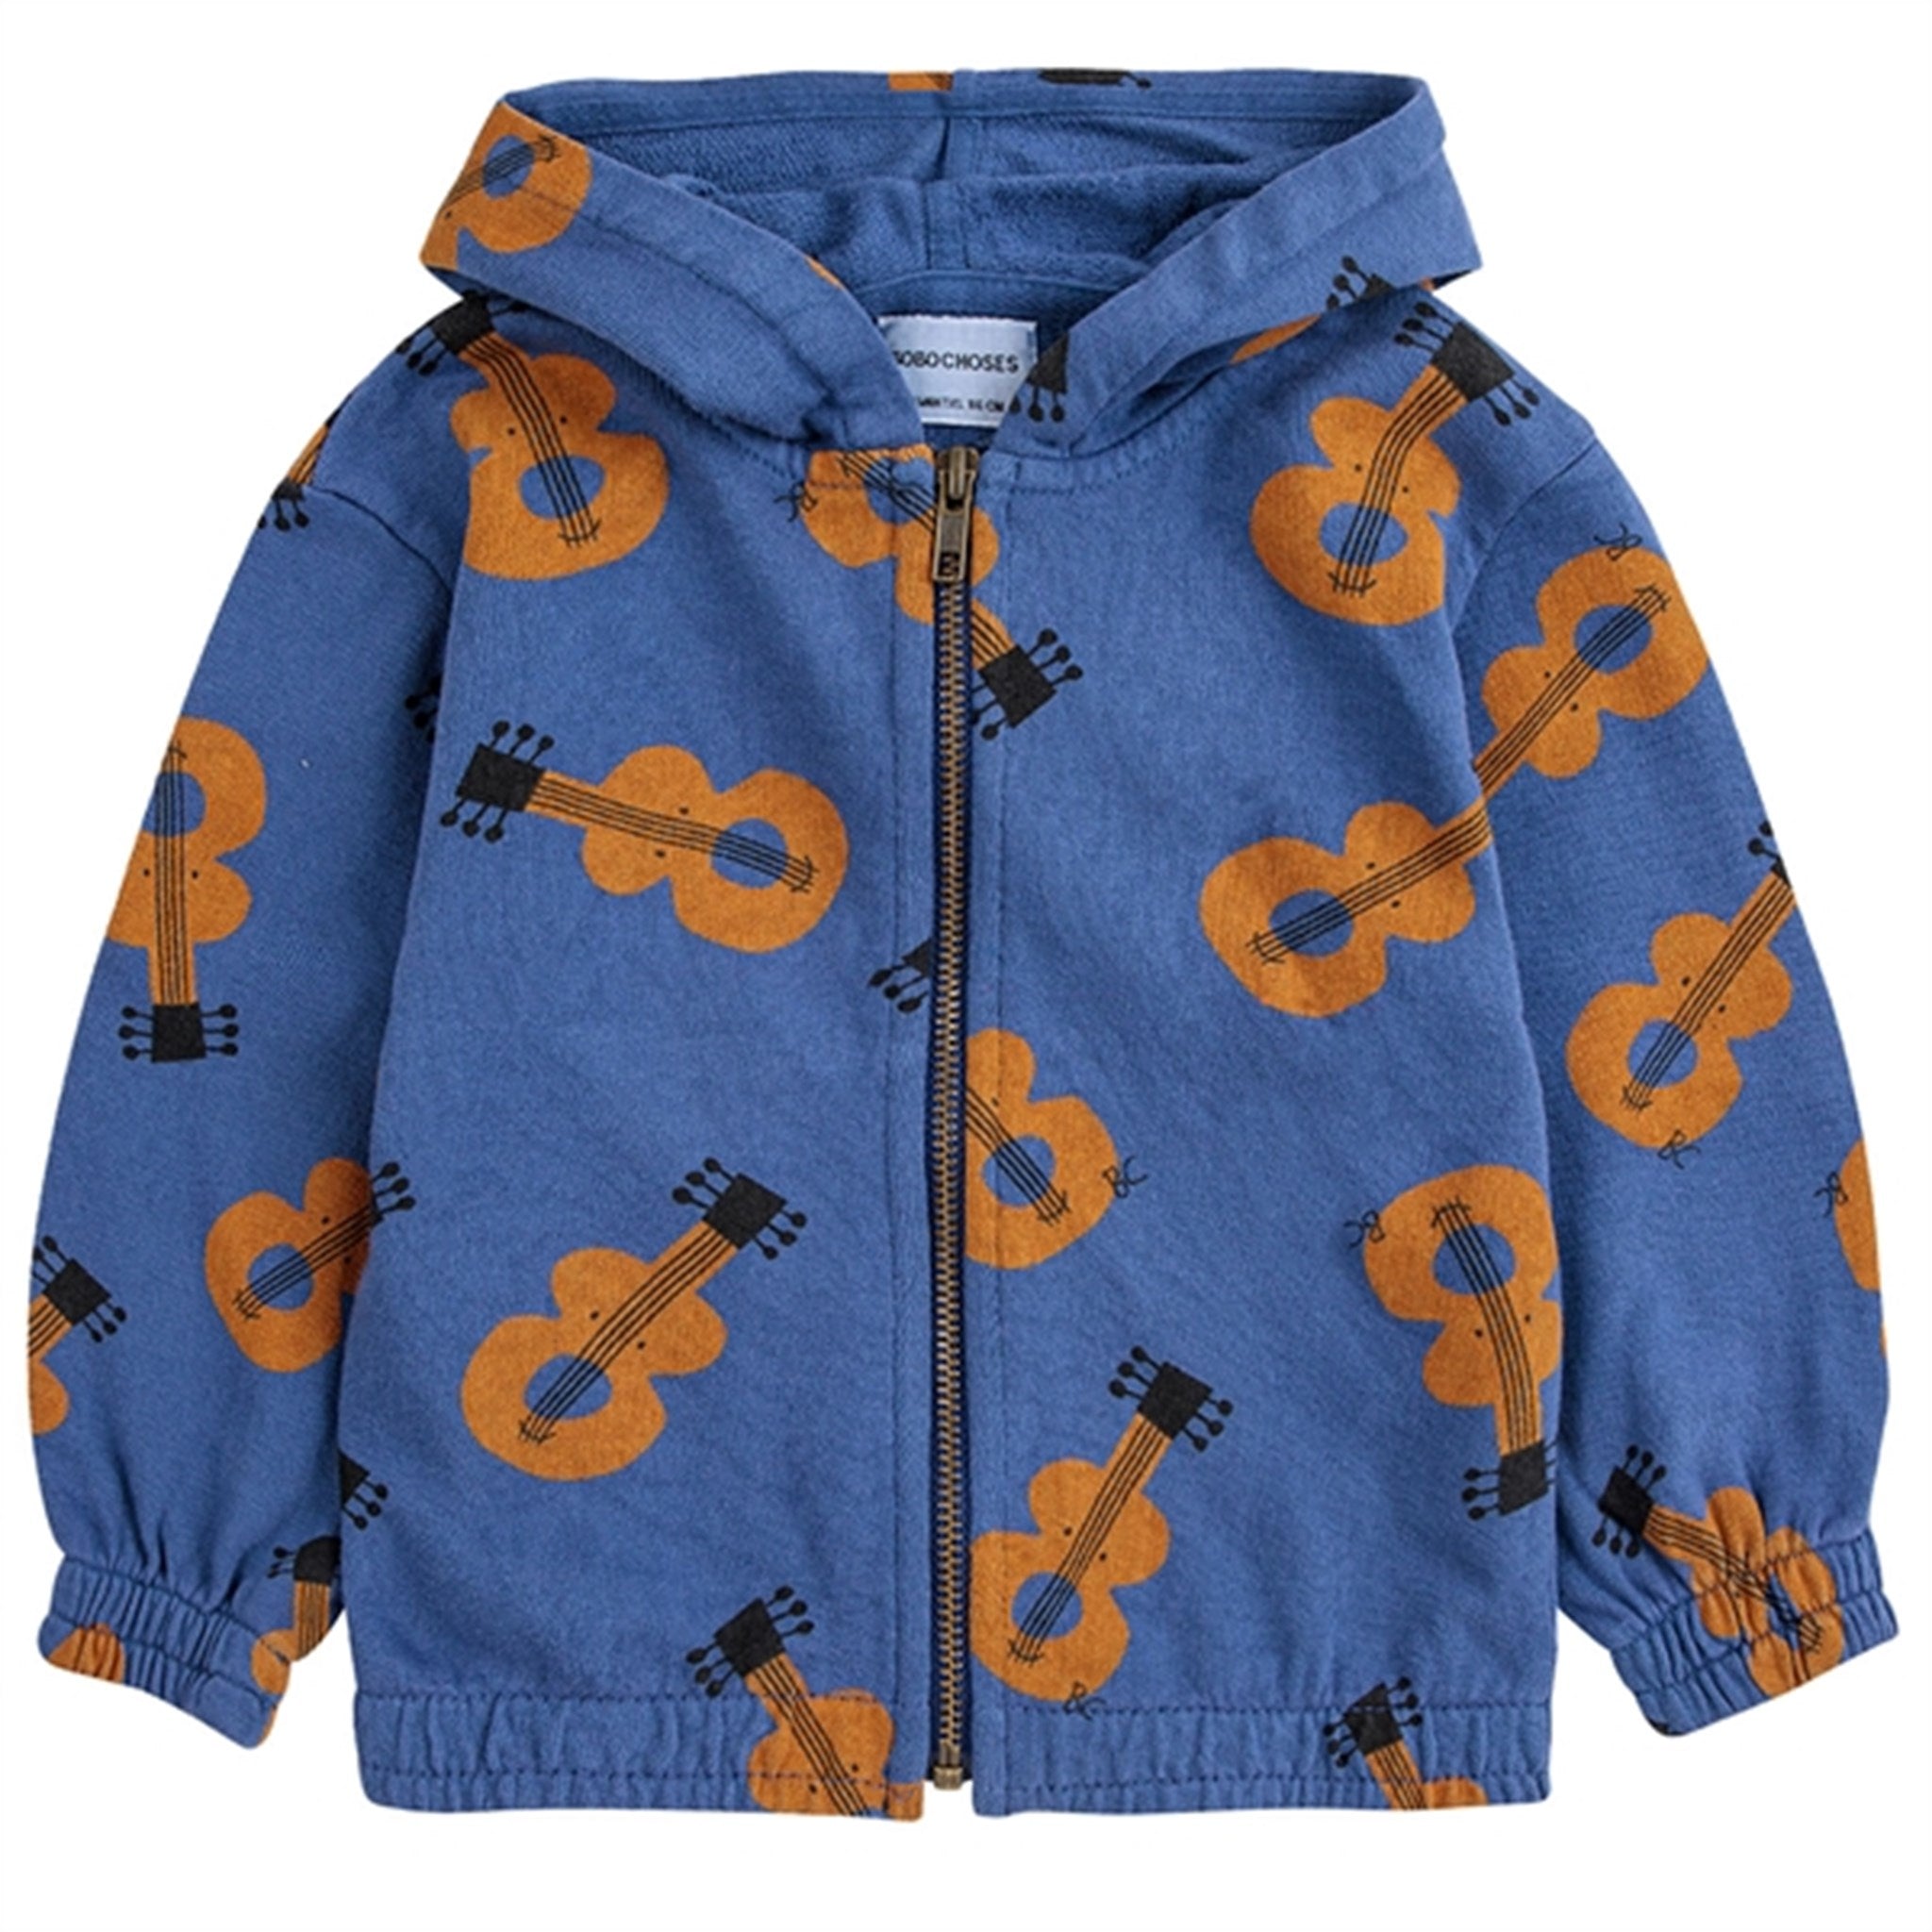 Bobo Choses Baby Acoustic Guitar All Over Zipped Hoodie Navy Blue - Str. 18 mdr